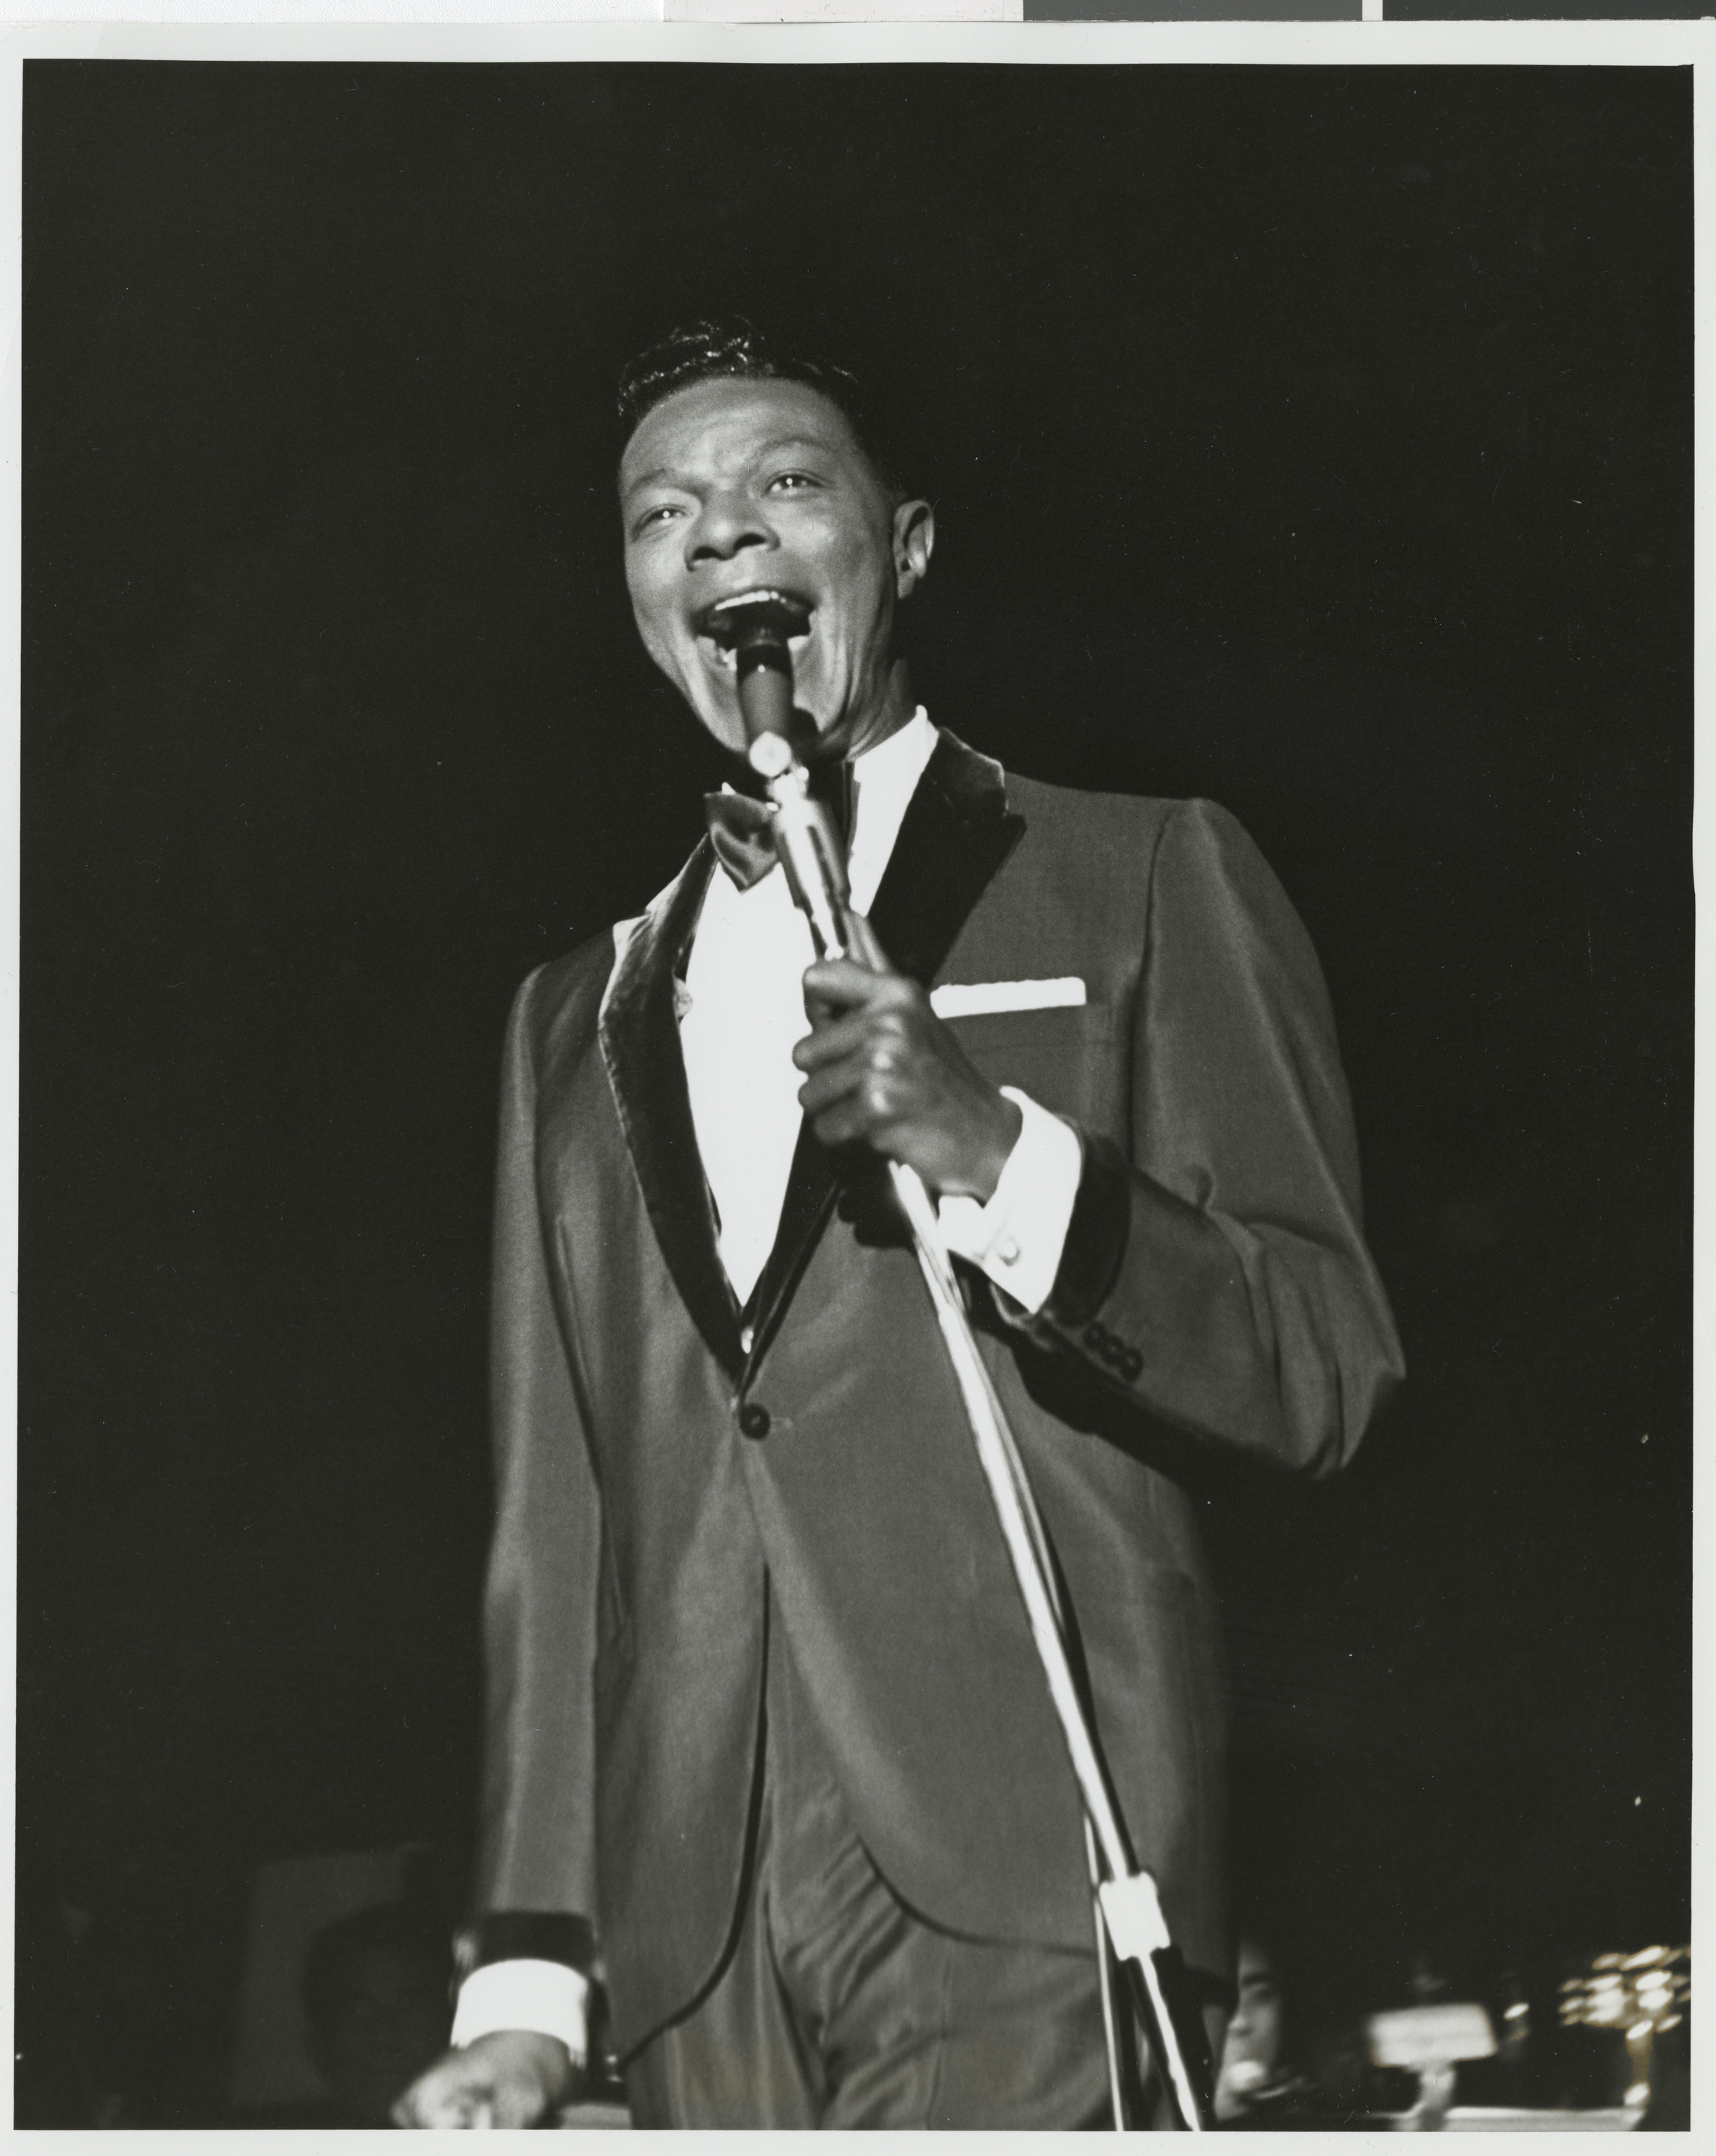 Cole onstage, image 014